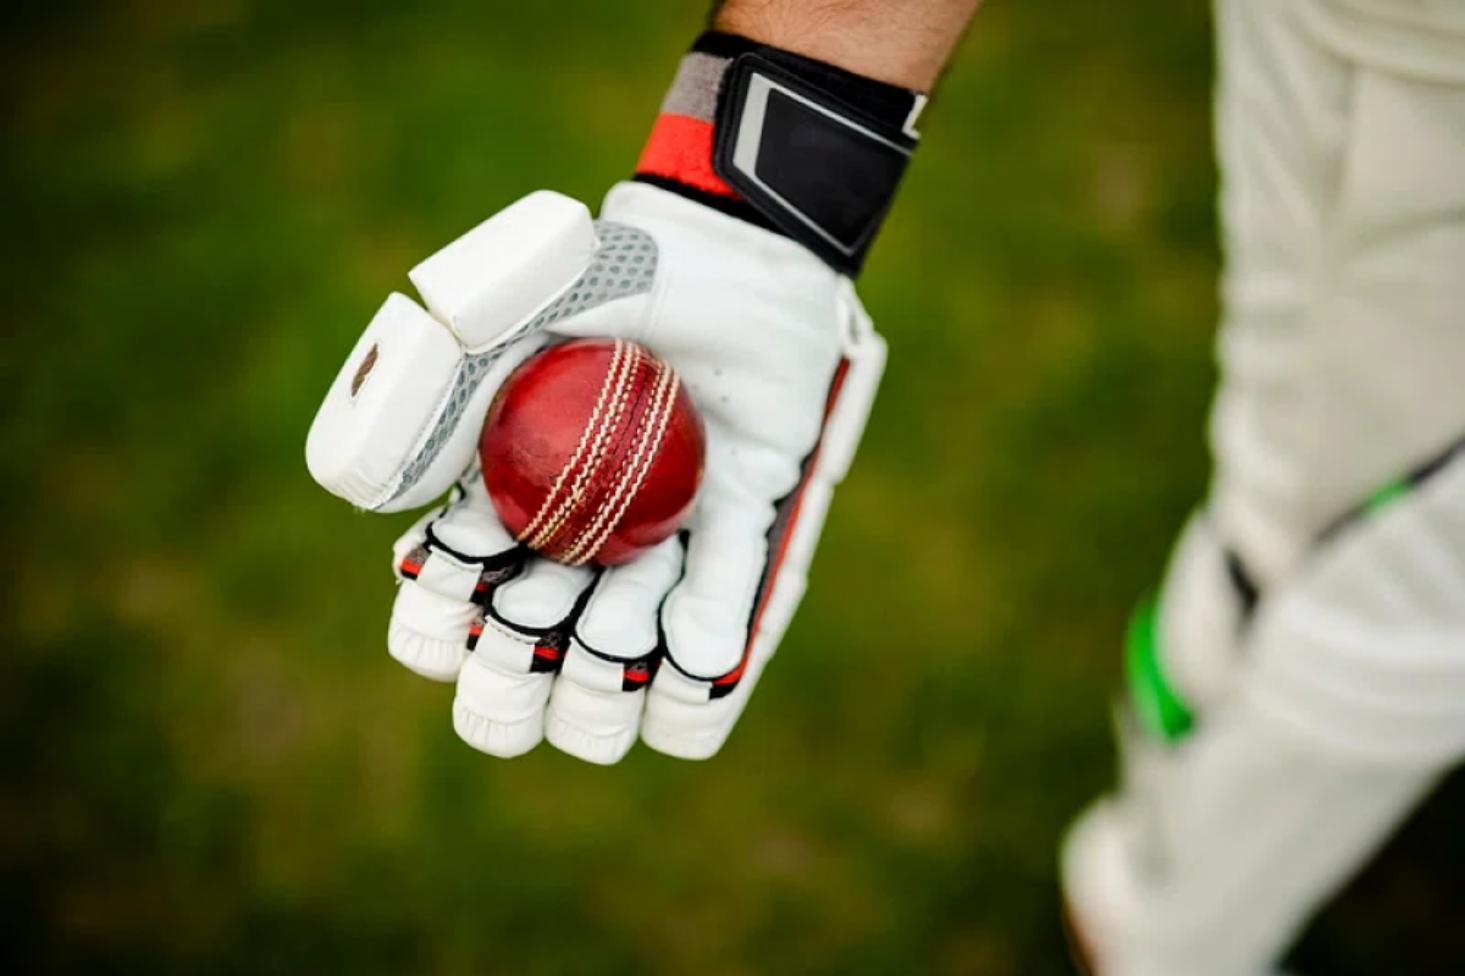 What Are The Key Bowling Rules Every Cricket Player Should Know